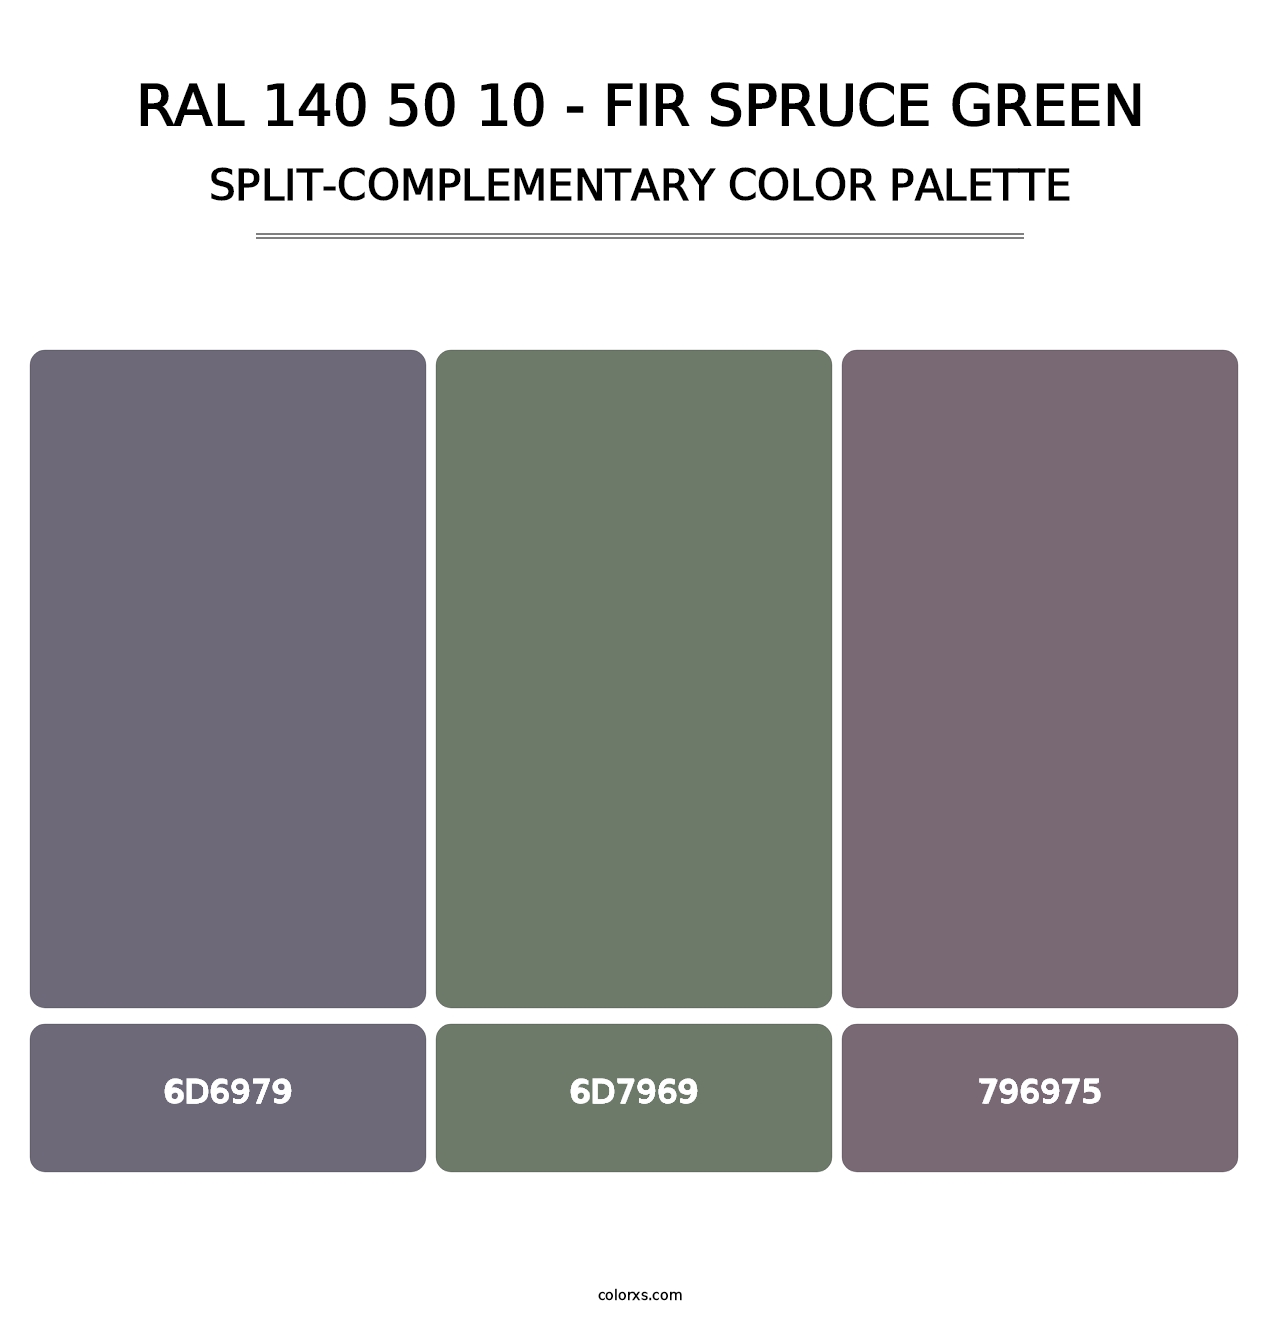 RAL 140 50 10 - Fir Spruce Green - Split-Complementary Color Palette